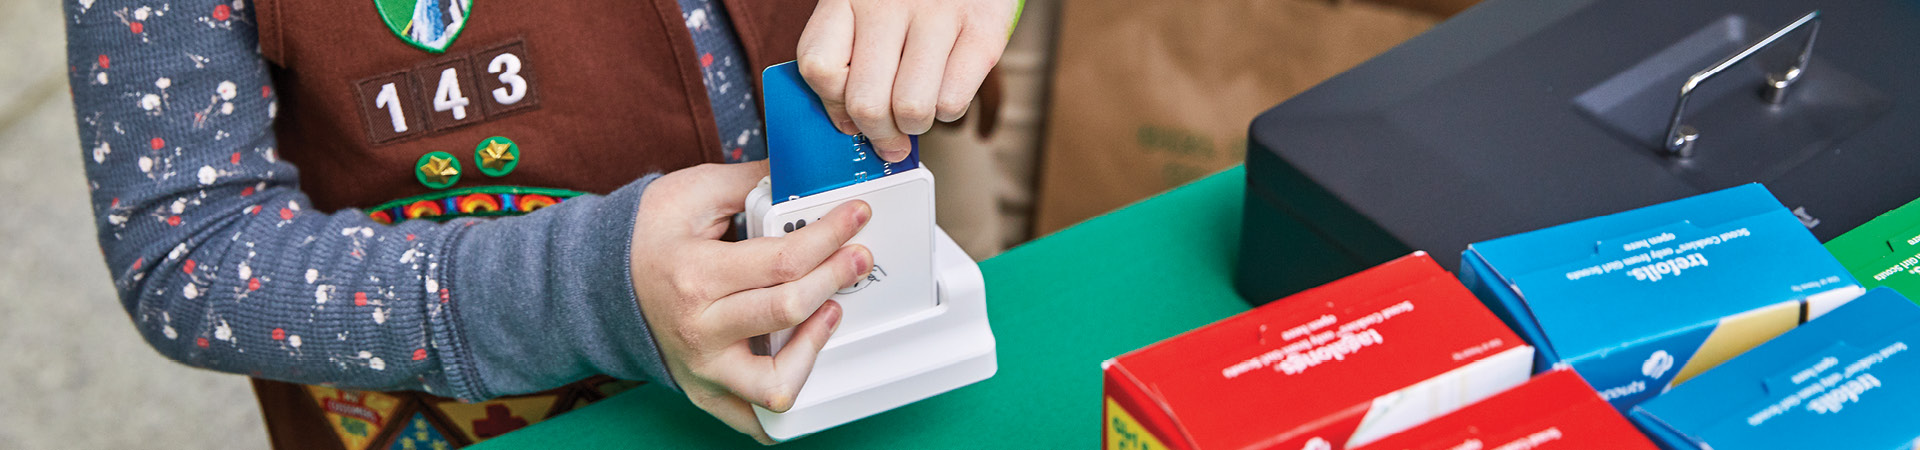  A Girl Scout scanning a customer's credit card at a cookie booth 